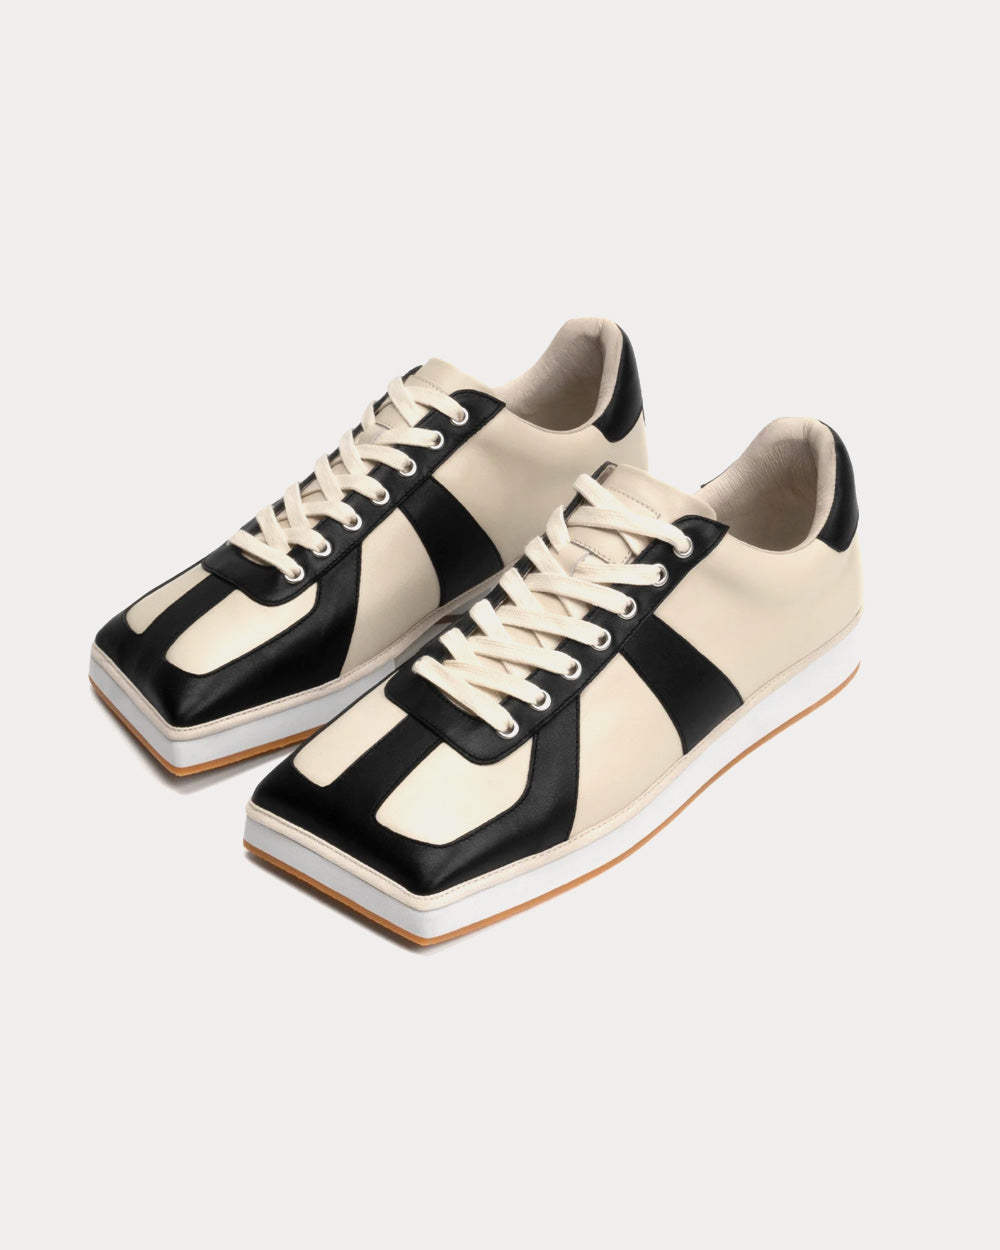 Foot Industry - 2022S/S 22S901 Anthracite Low Top Sneakers